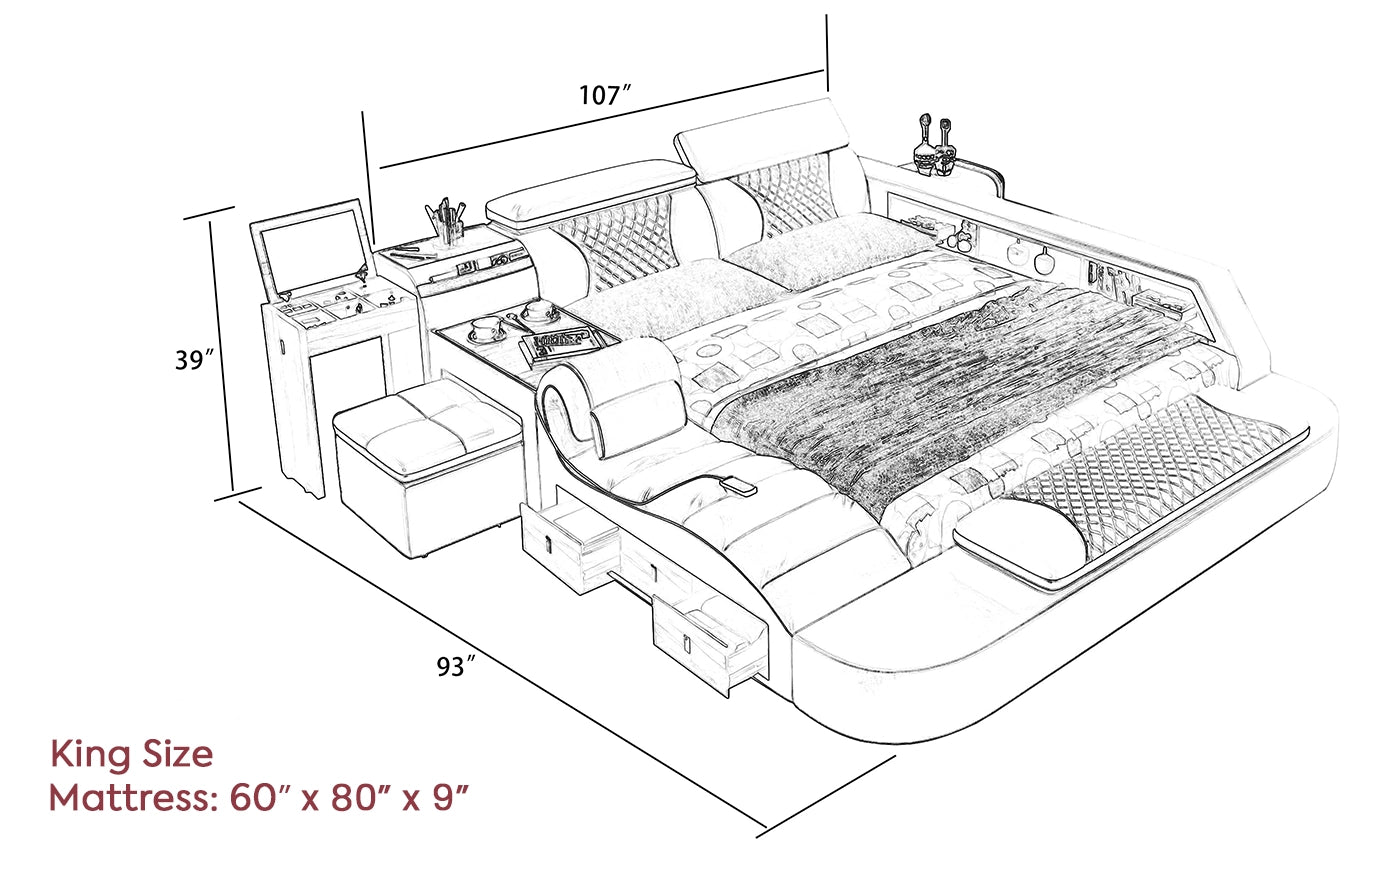 Hunky Modular Futuristic Multifunctional Smart Bed With Built in Massage Chair and Storage Space